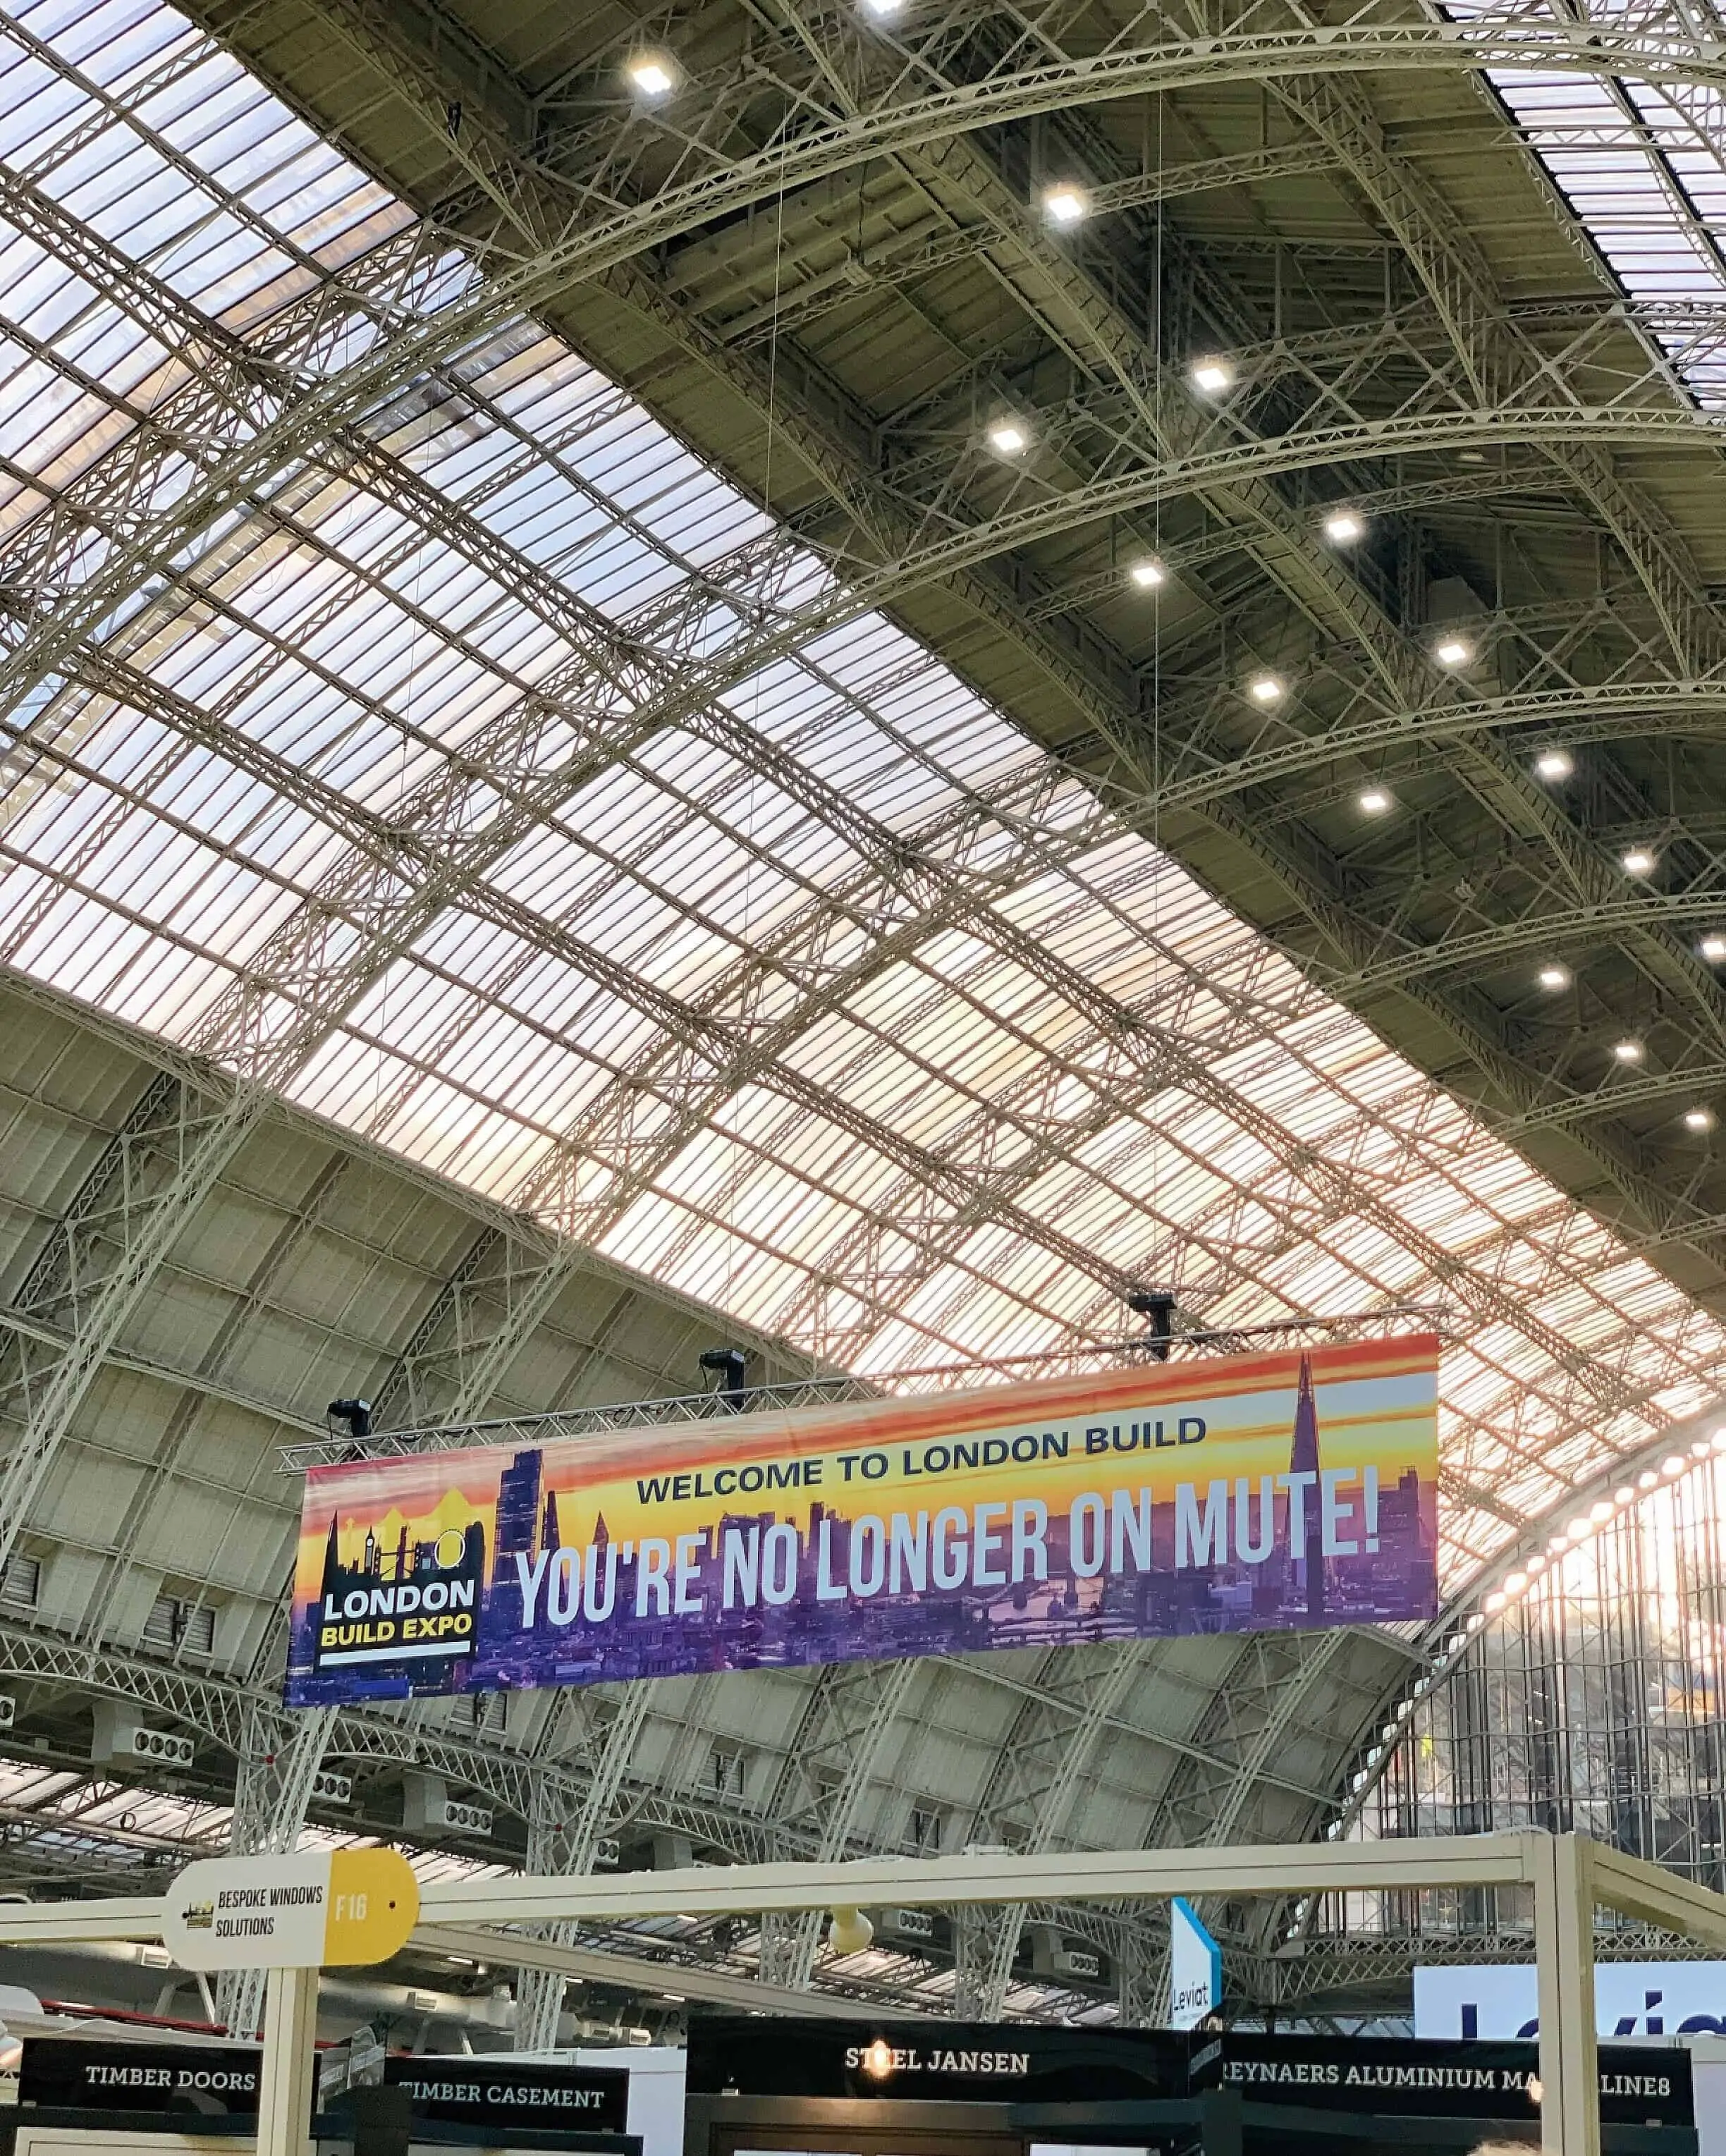 London Build Expo 2021: You Are No Longer on Mute